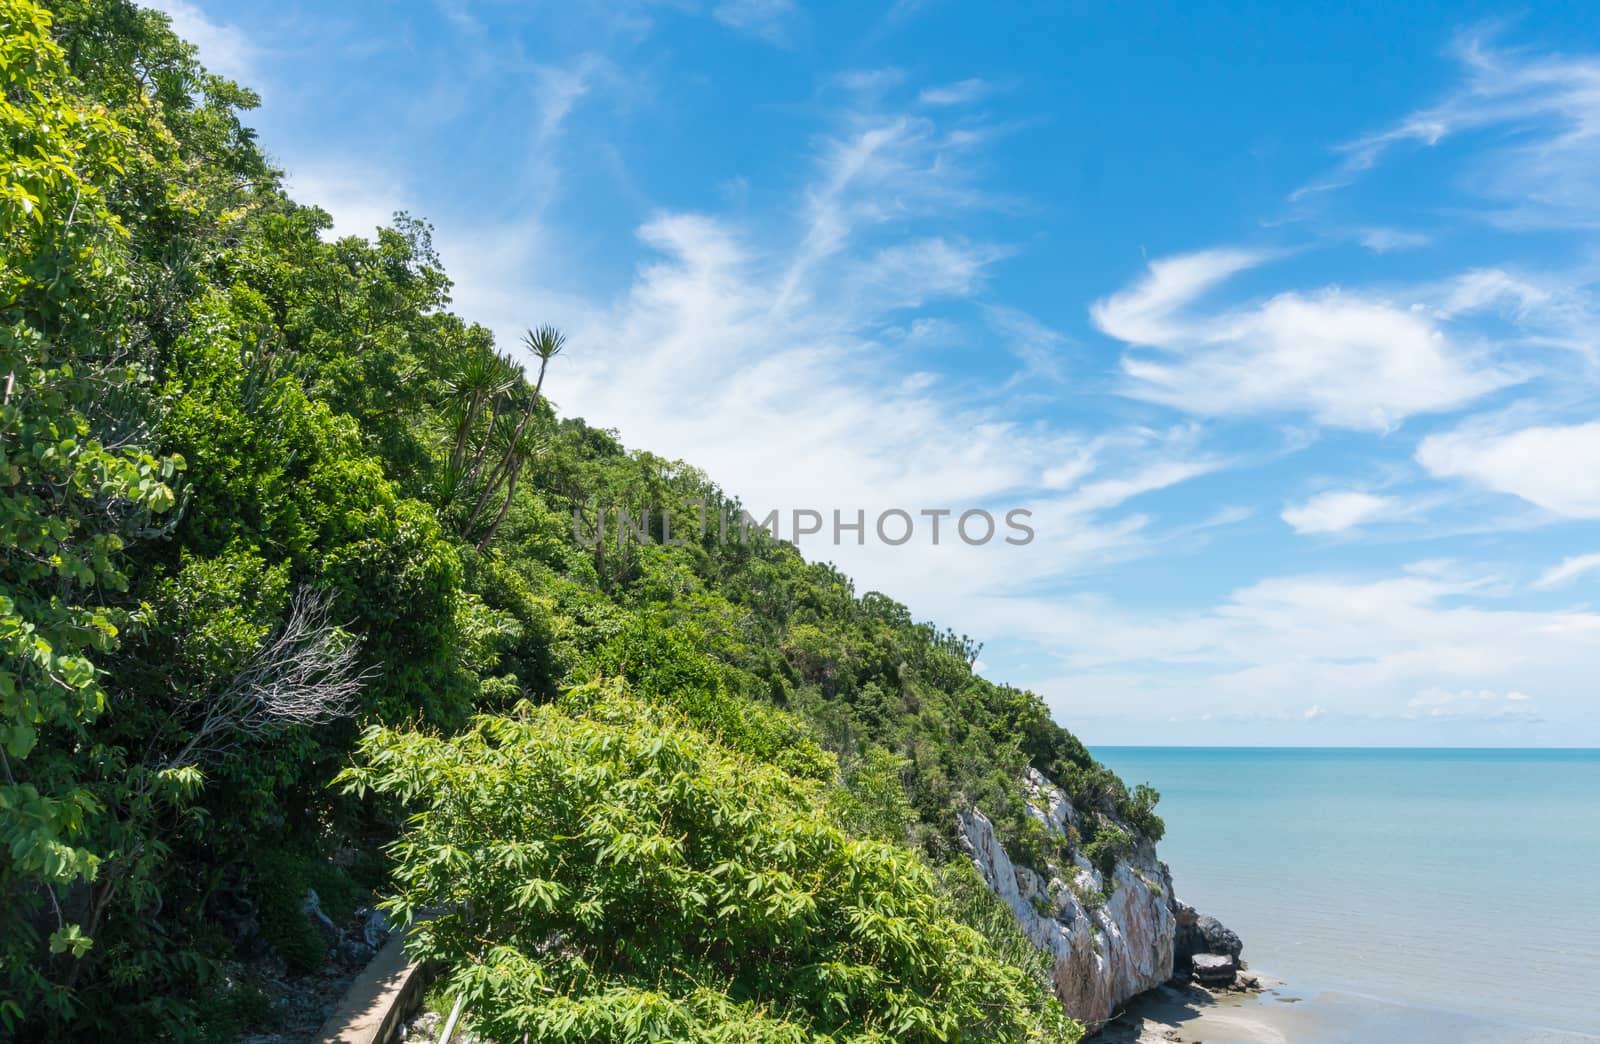 Green Rock or Stone Mountain or Hill and blue sky and walking way at Laem Sala Prachuap Khiri Khan Thailand. Landscape or scenery summer 
season concept